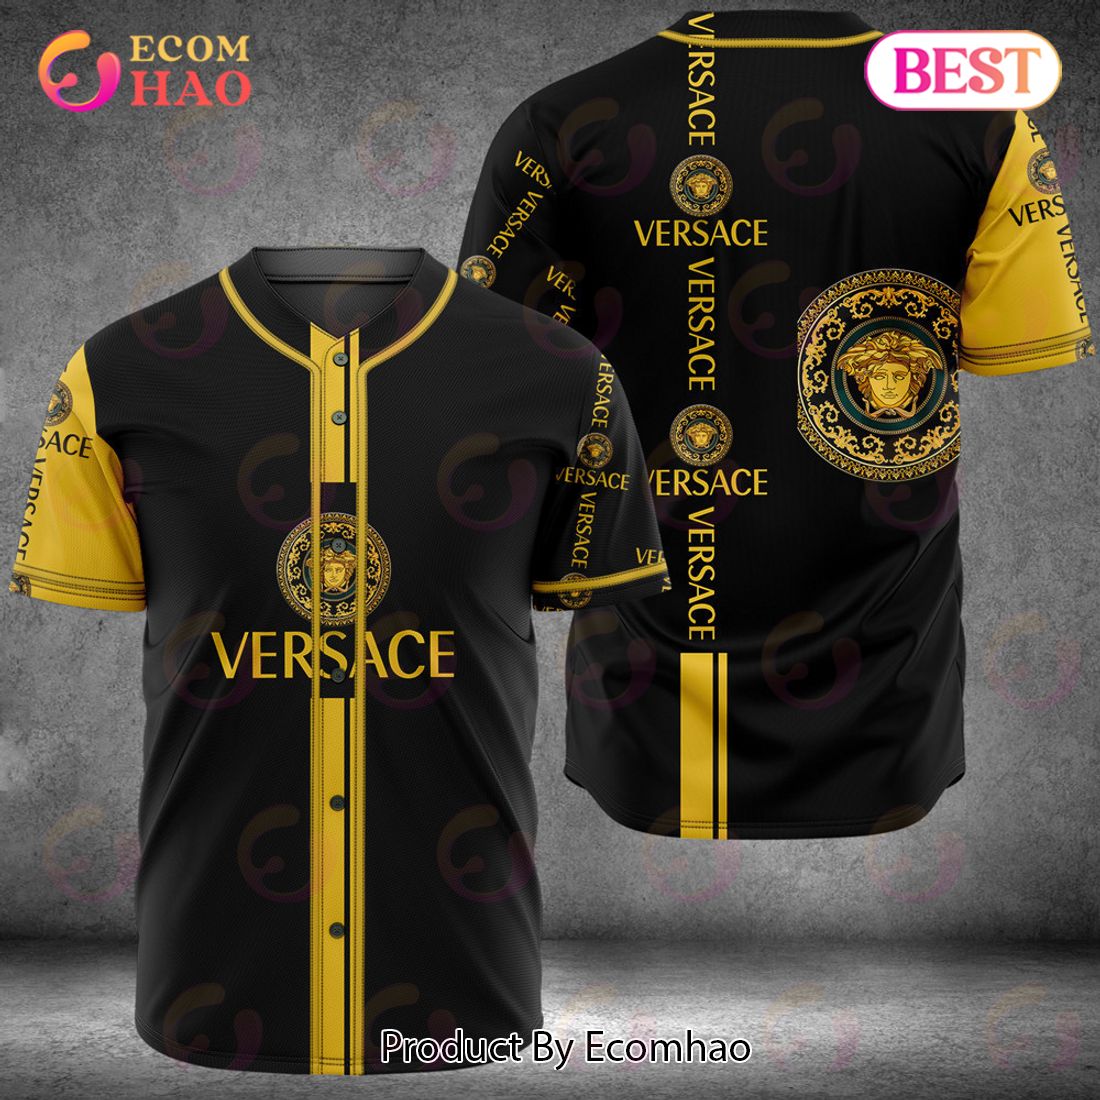 Versace Black Gold Luxury Brand Jersey Limited Edition